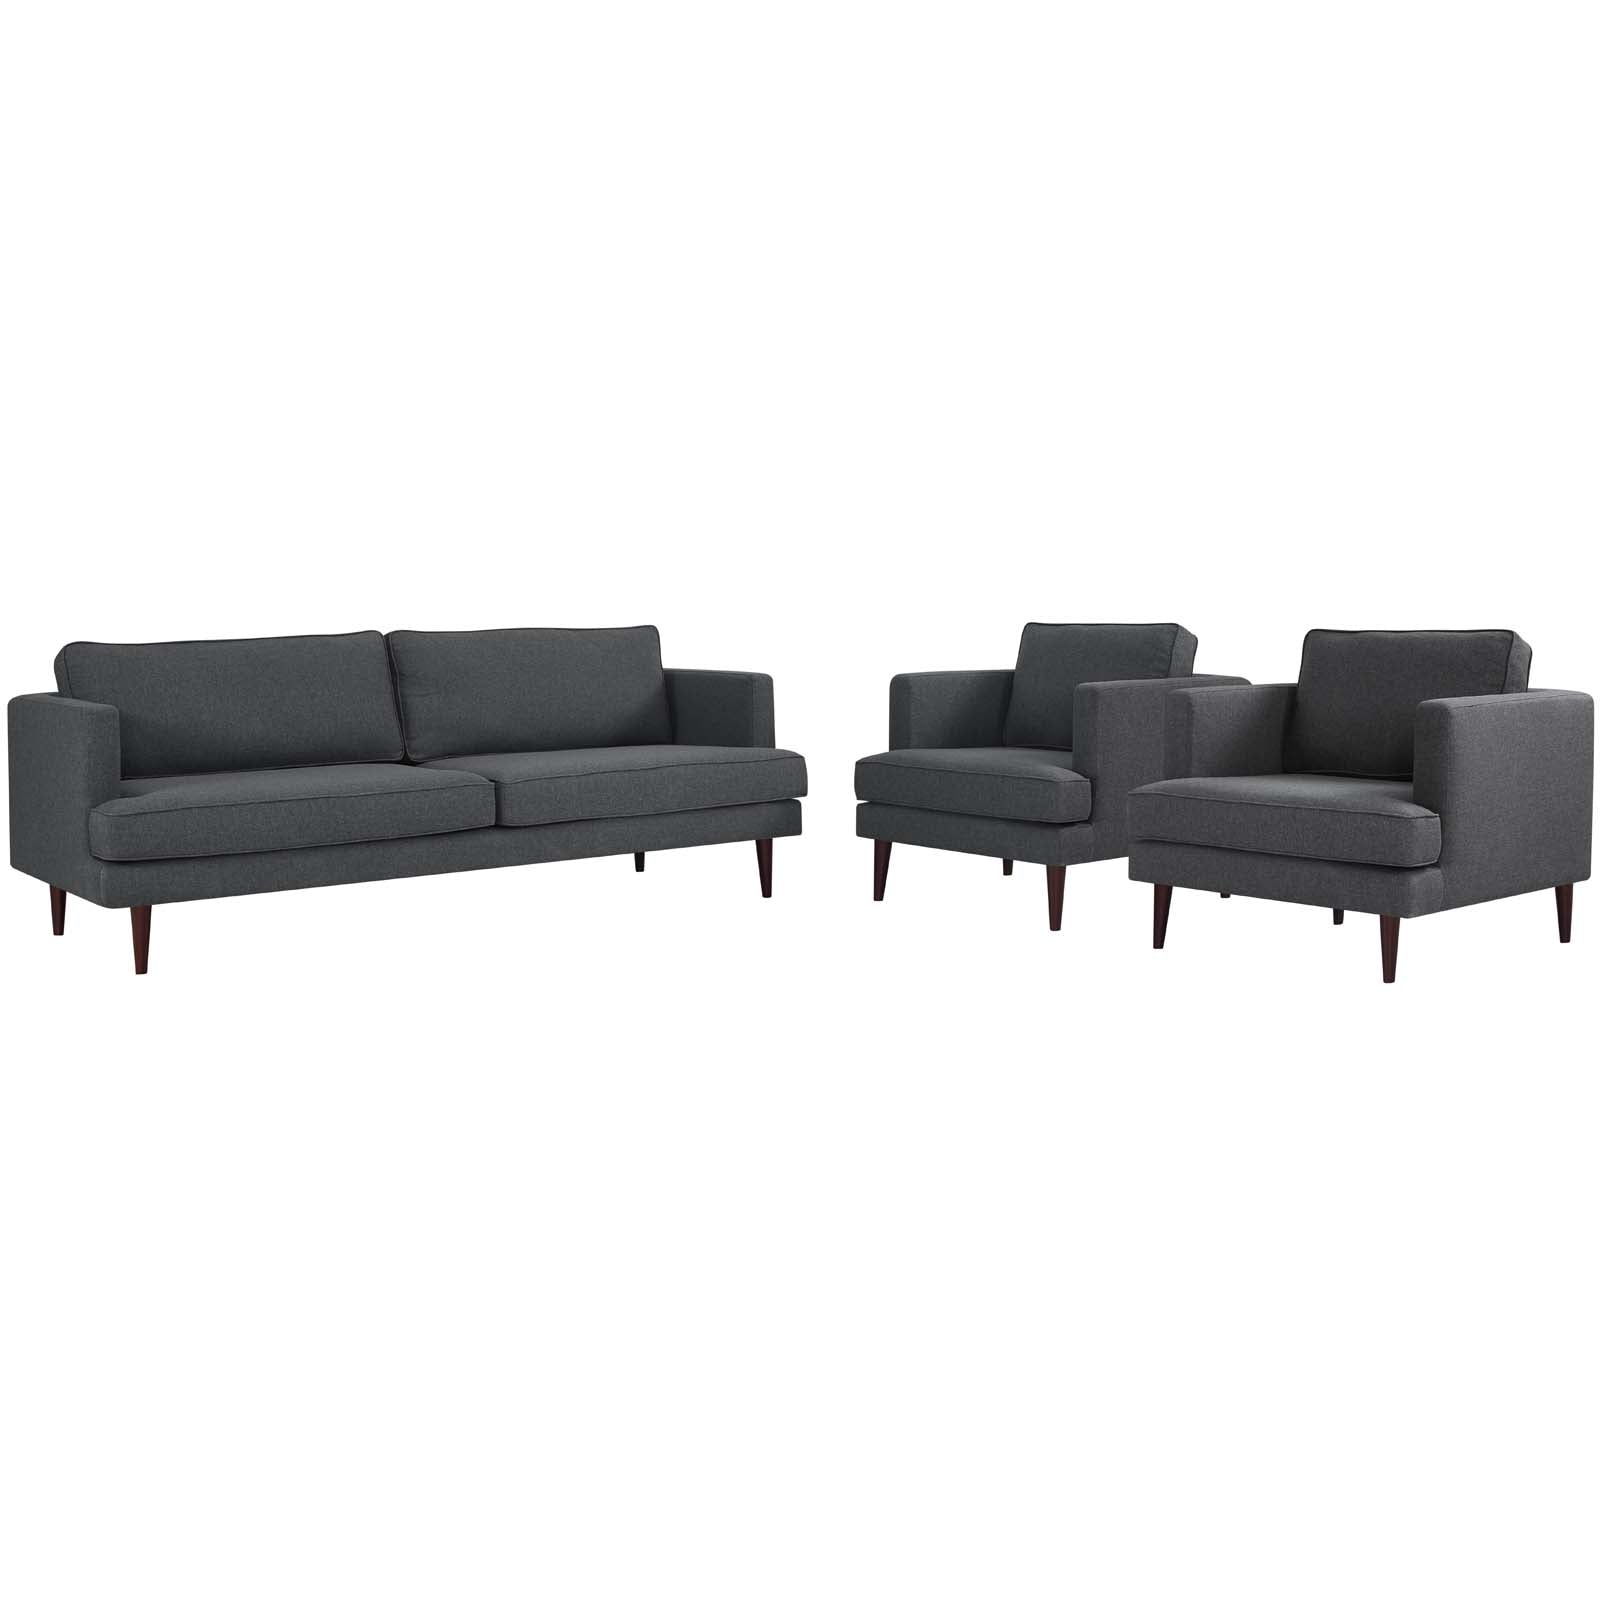 Agile 3 Piece Upholstered Fabric Set - East Shore Modern Home Furnishings